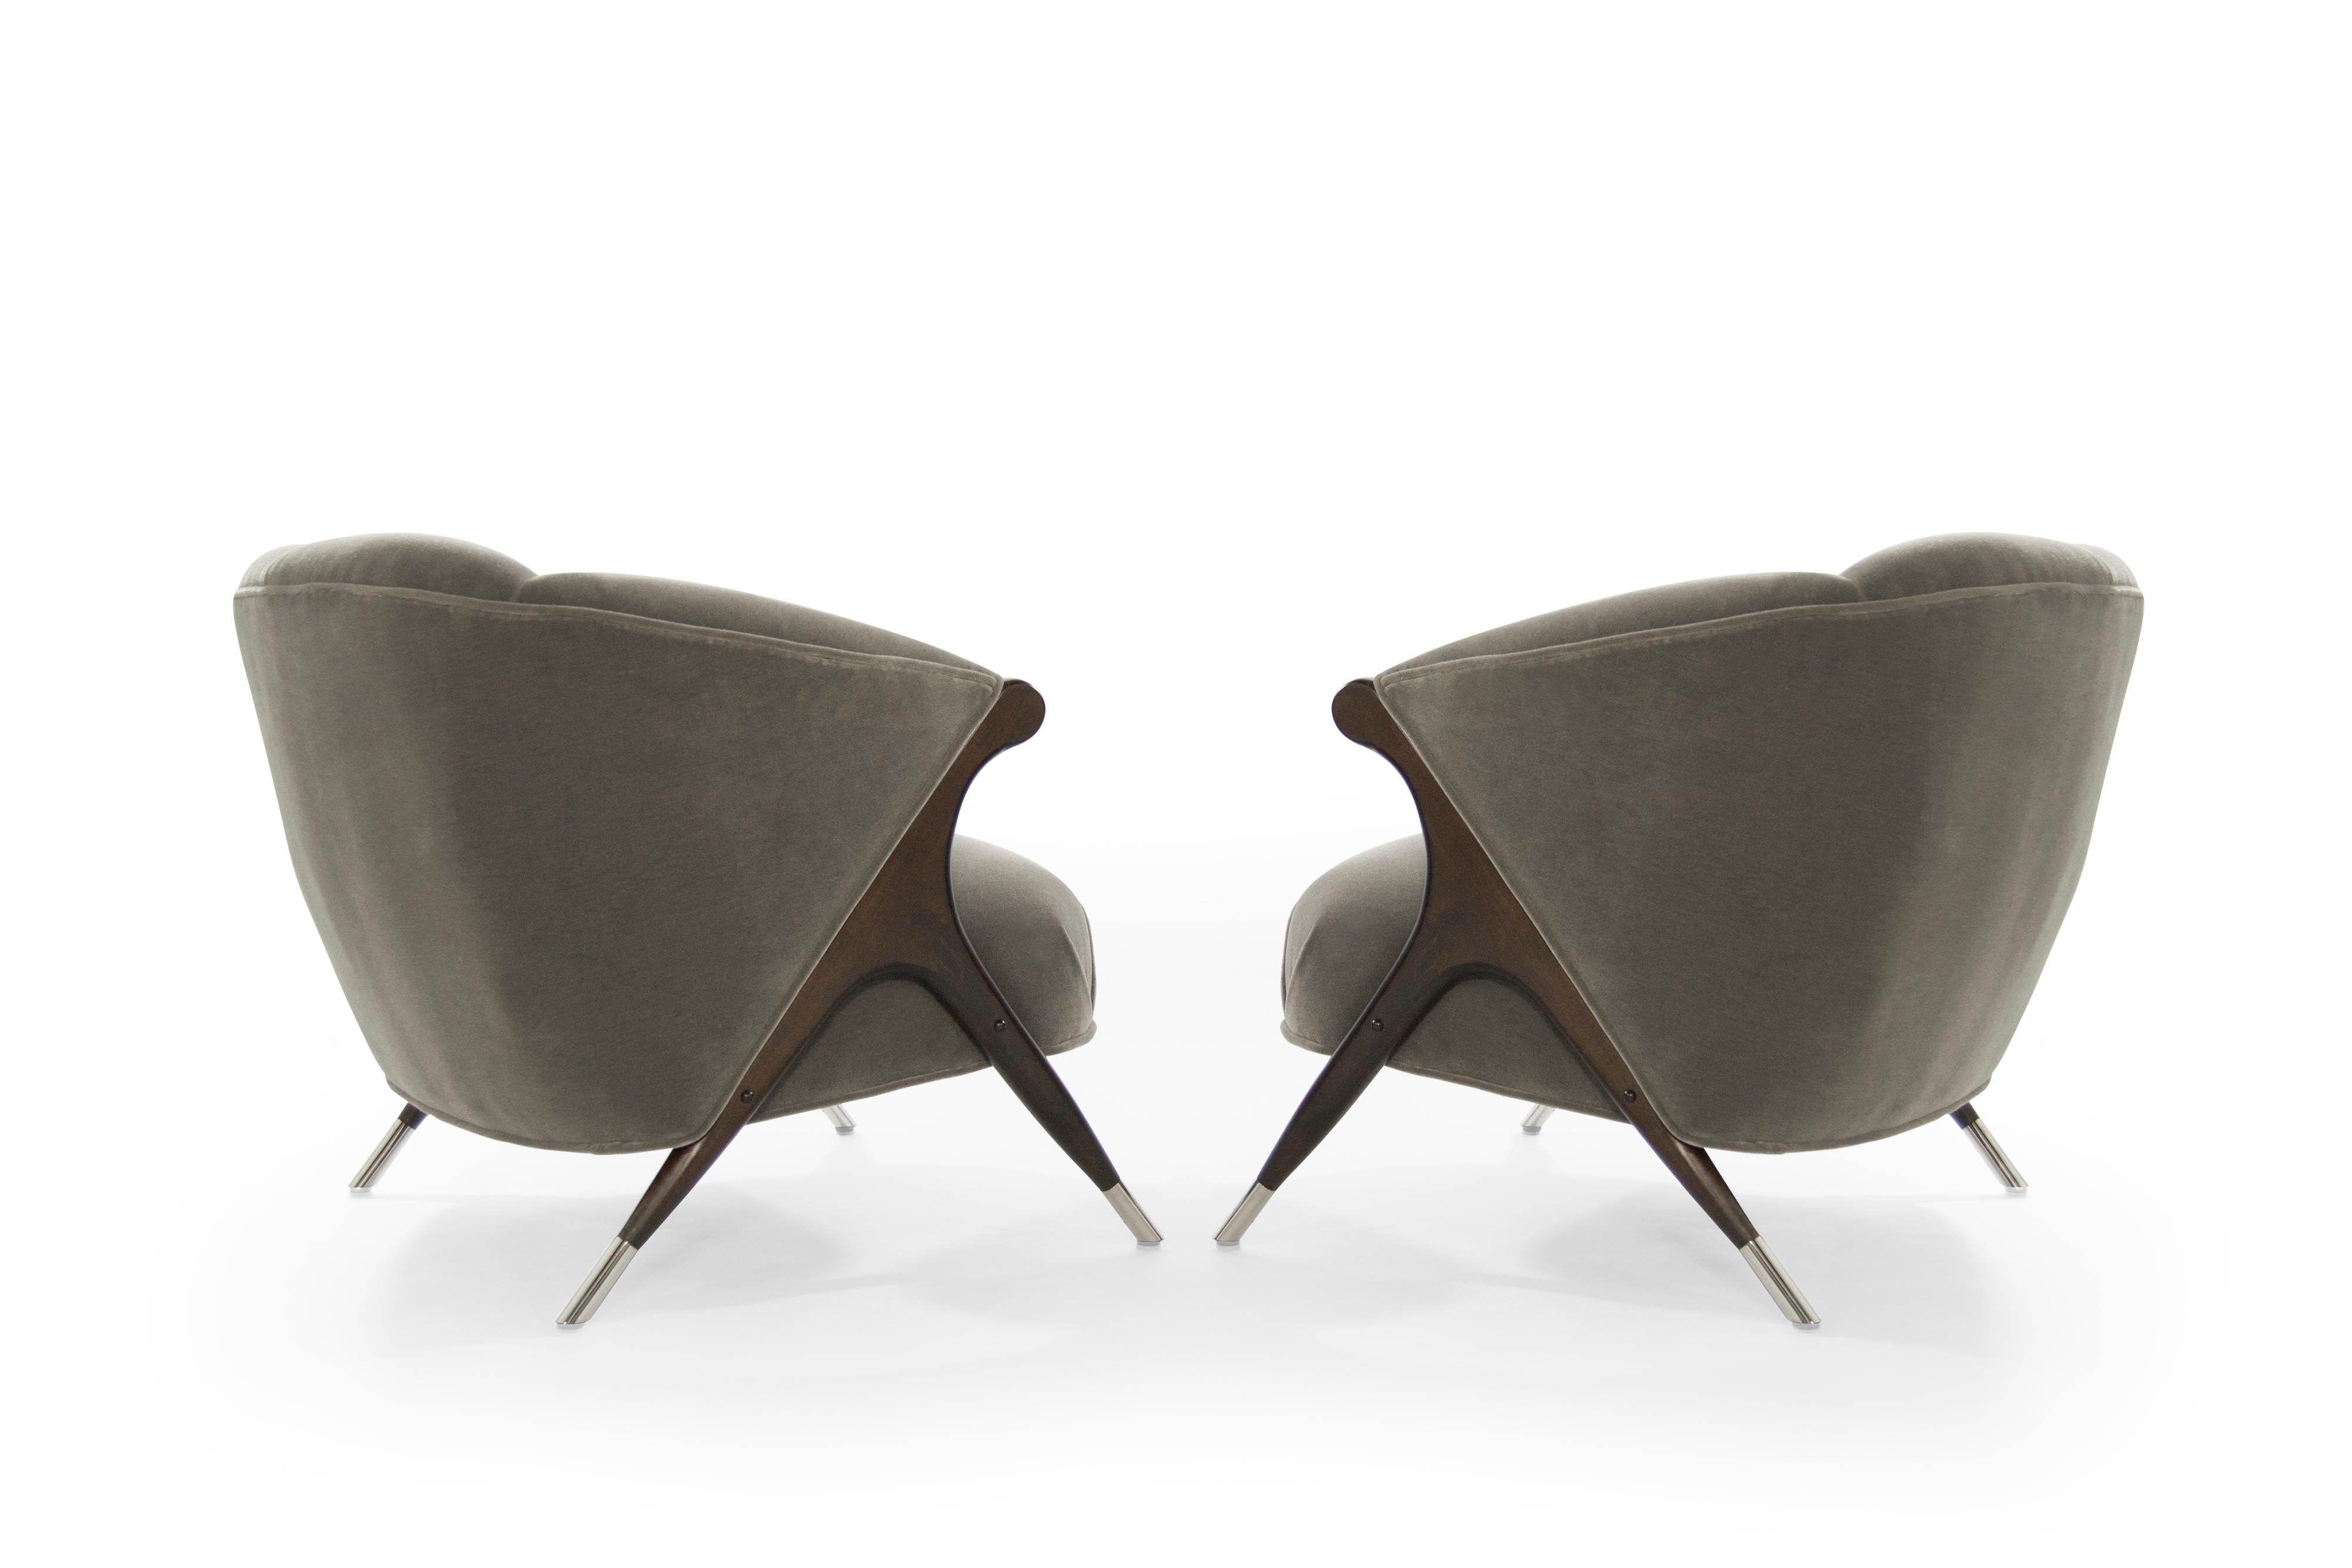 Mid-Century Modern Modernist Karpen Lounge Chairs in Charcoal Mohair, 1950s